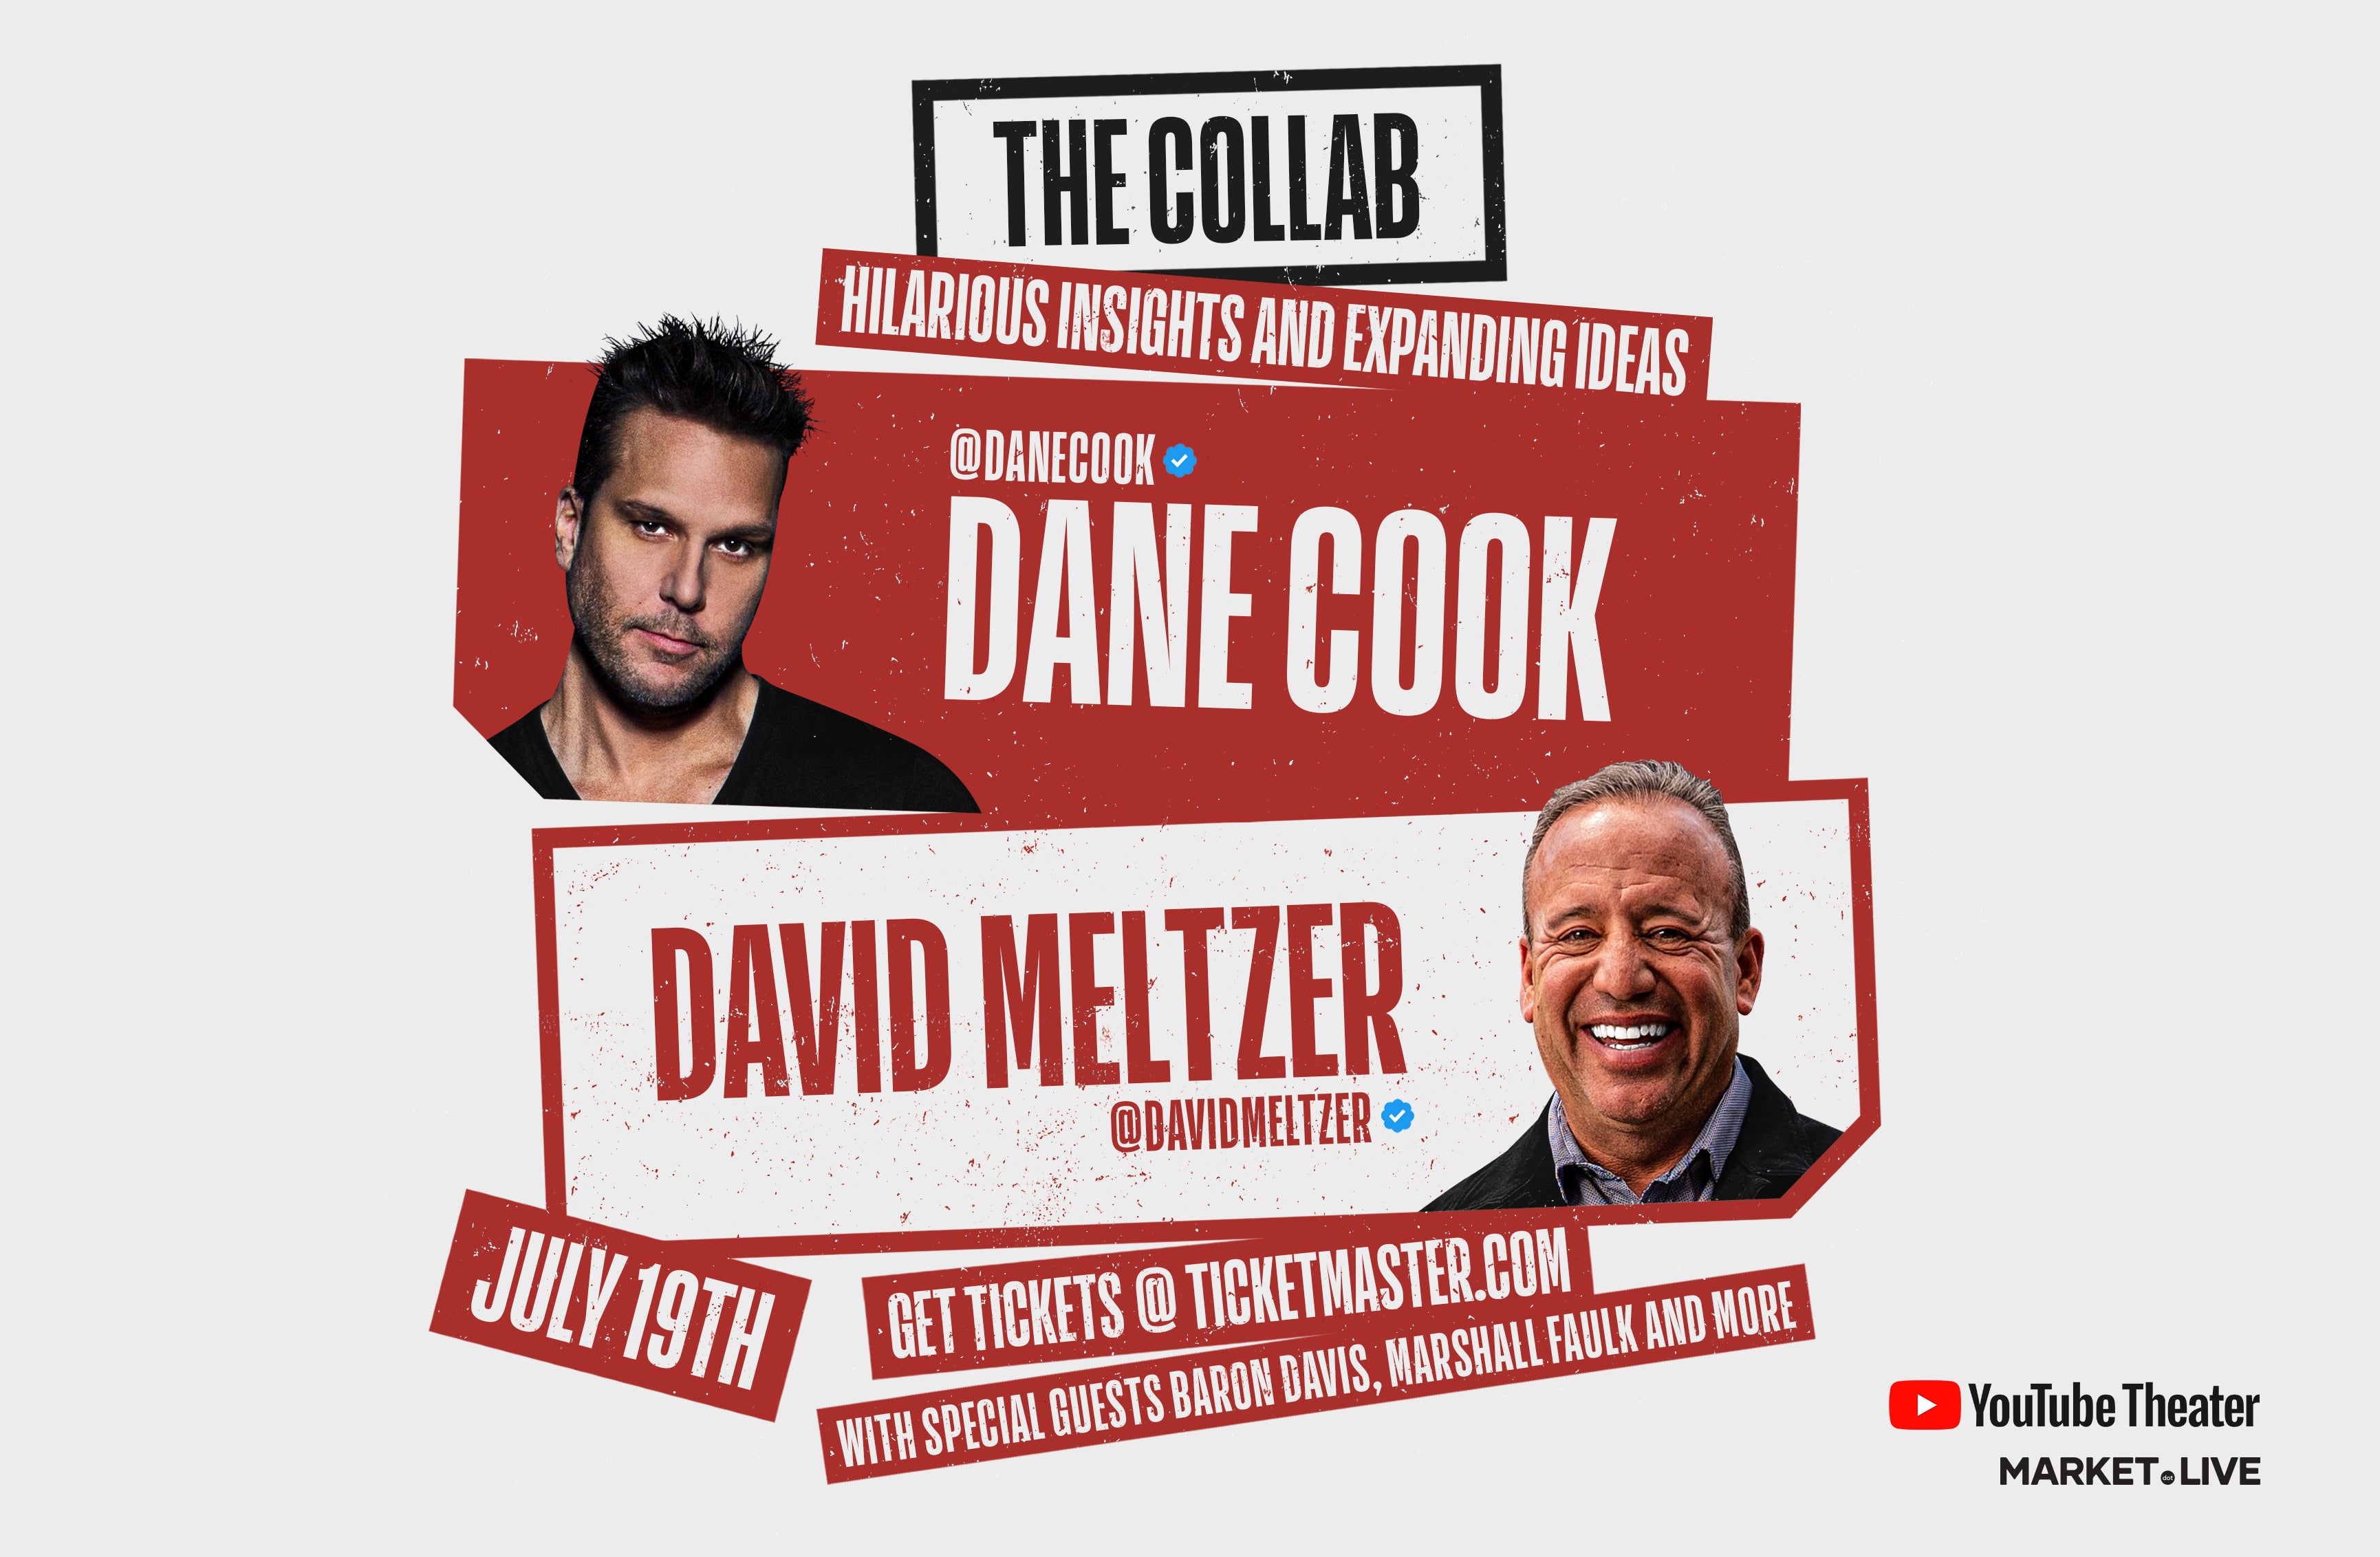 The Collab featuring Dane Cook and David Meltzer Debuts at YouTube Theater on Friday, July 19th with special guests Baron Davis, Marshall Faulk, and more